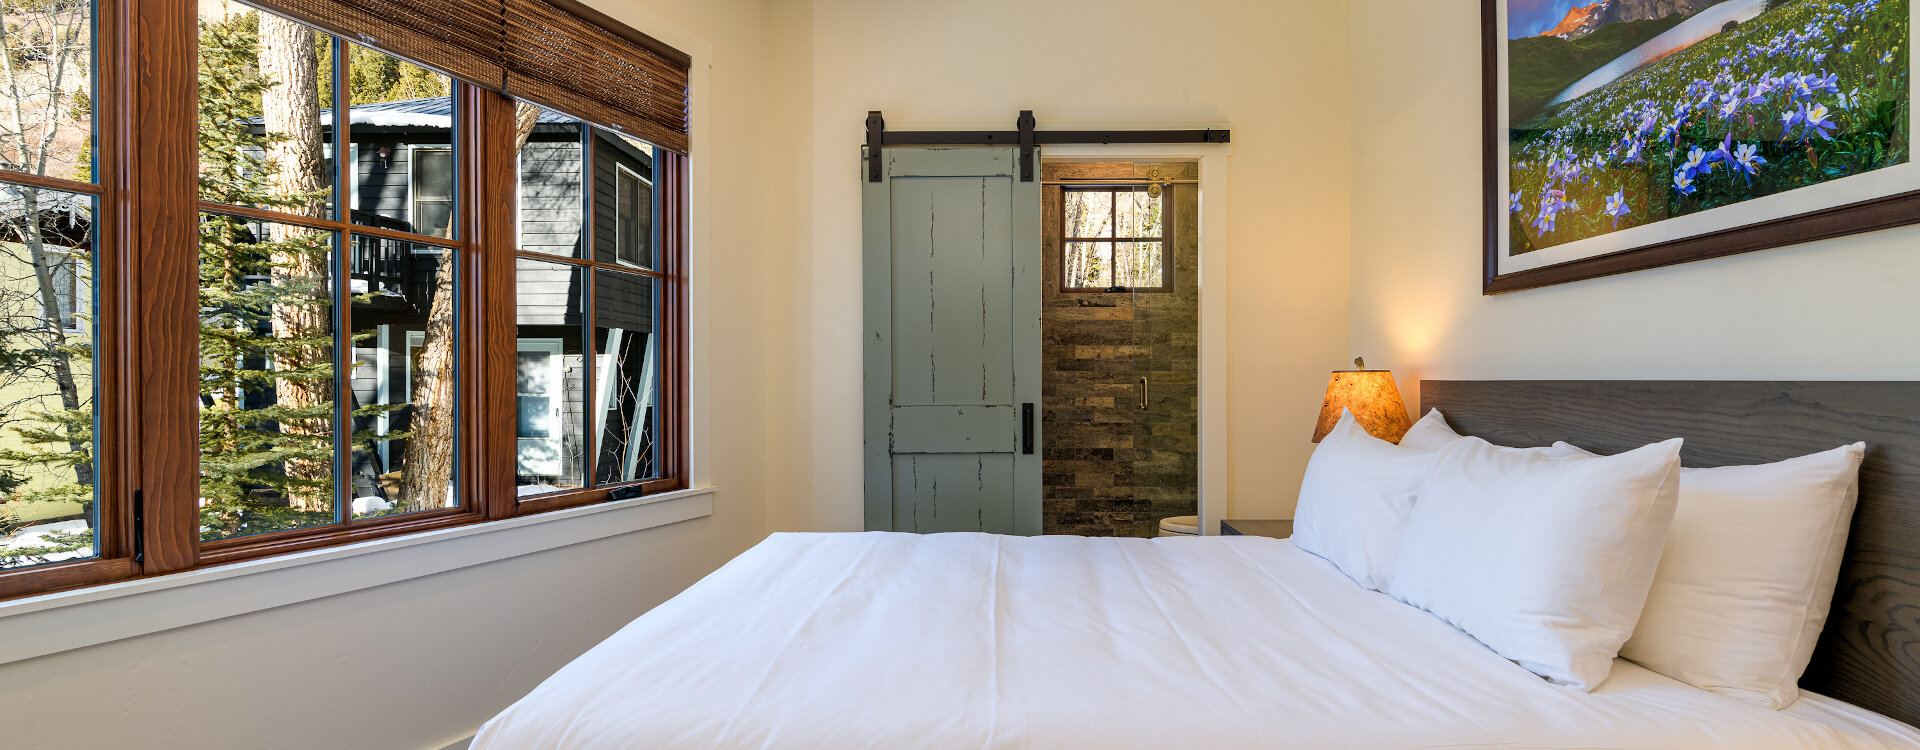 3.0-telluride-the-treehouse-guest-suite-1